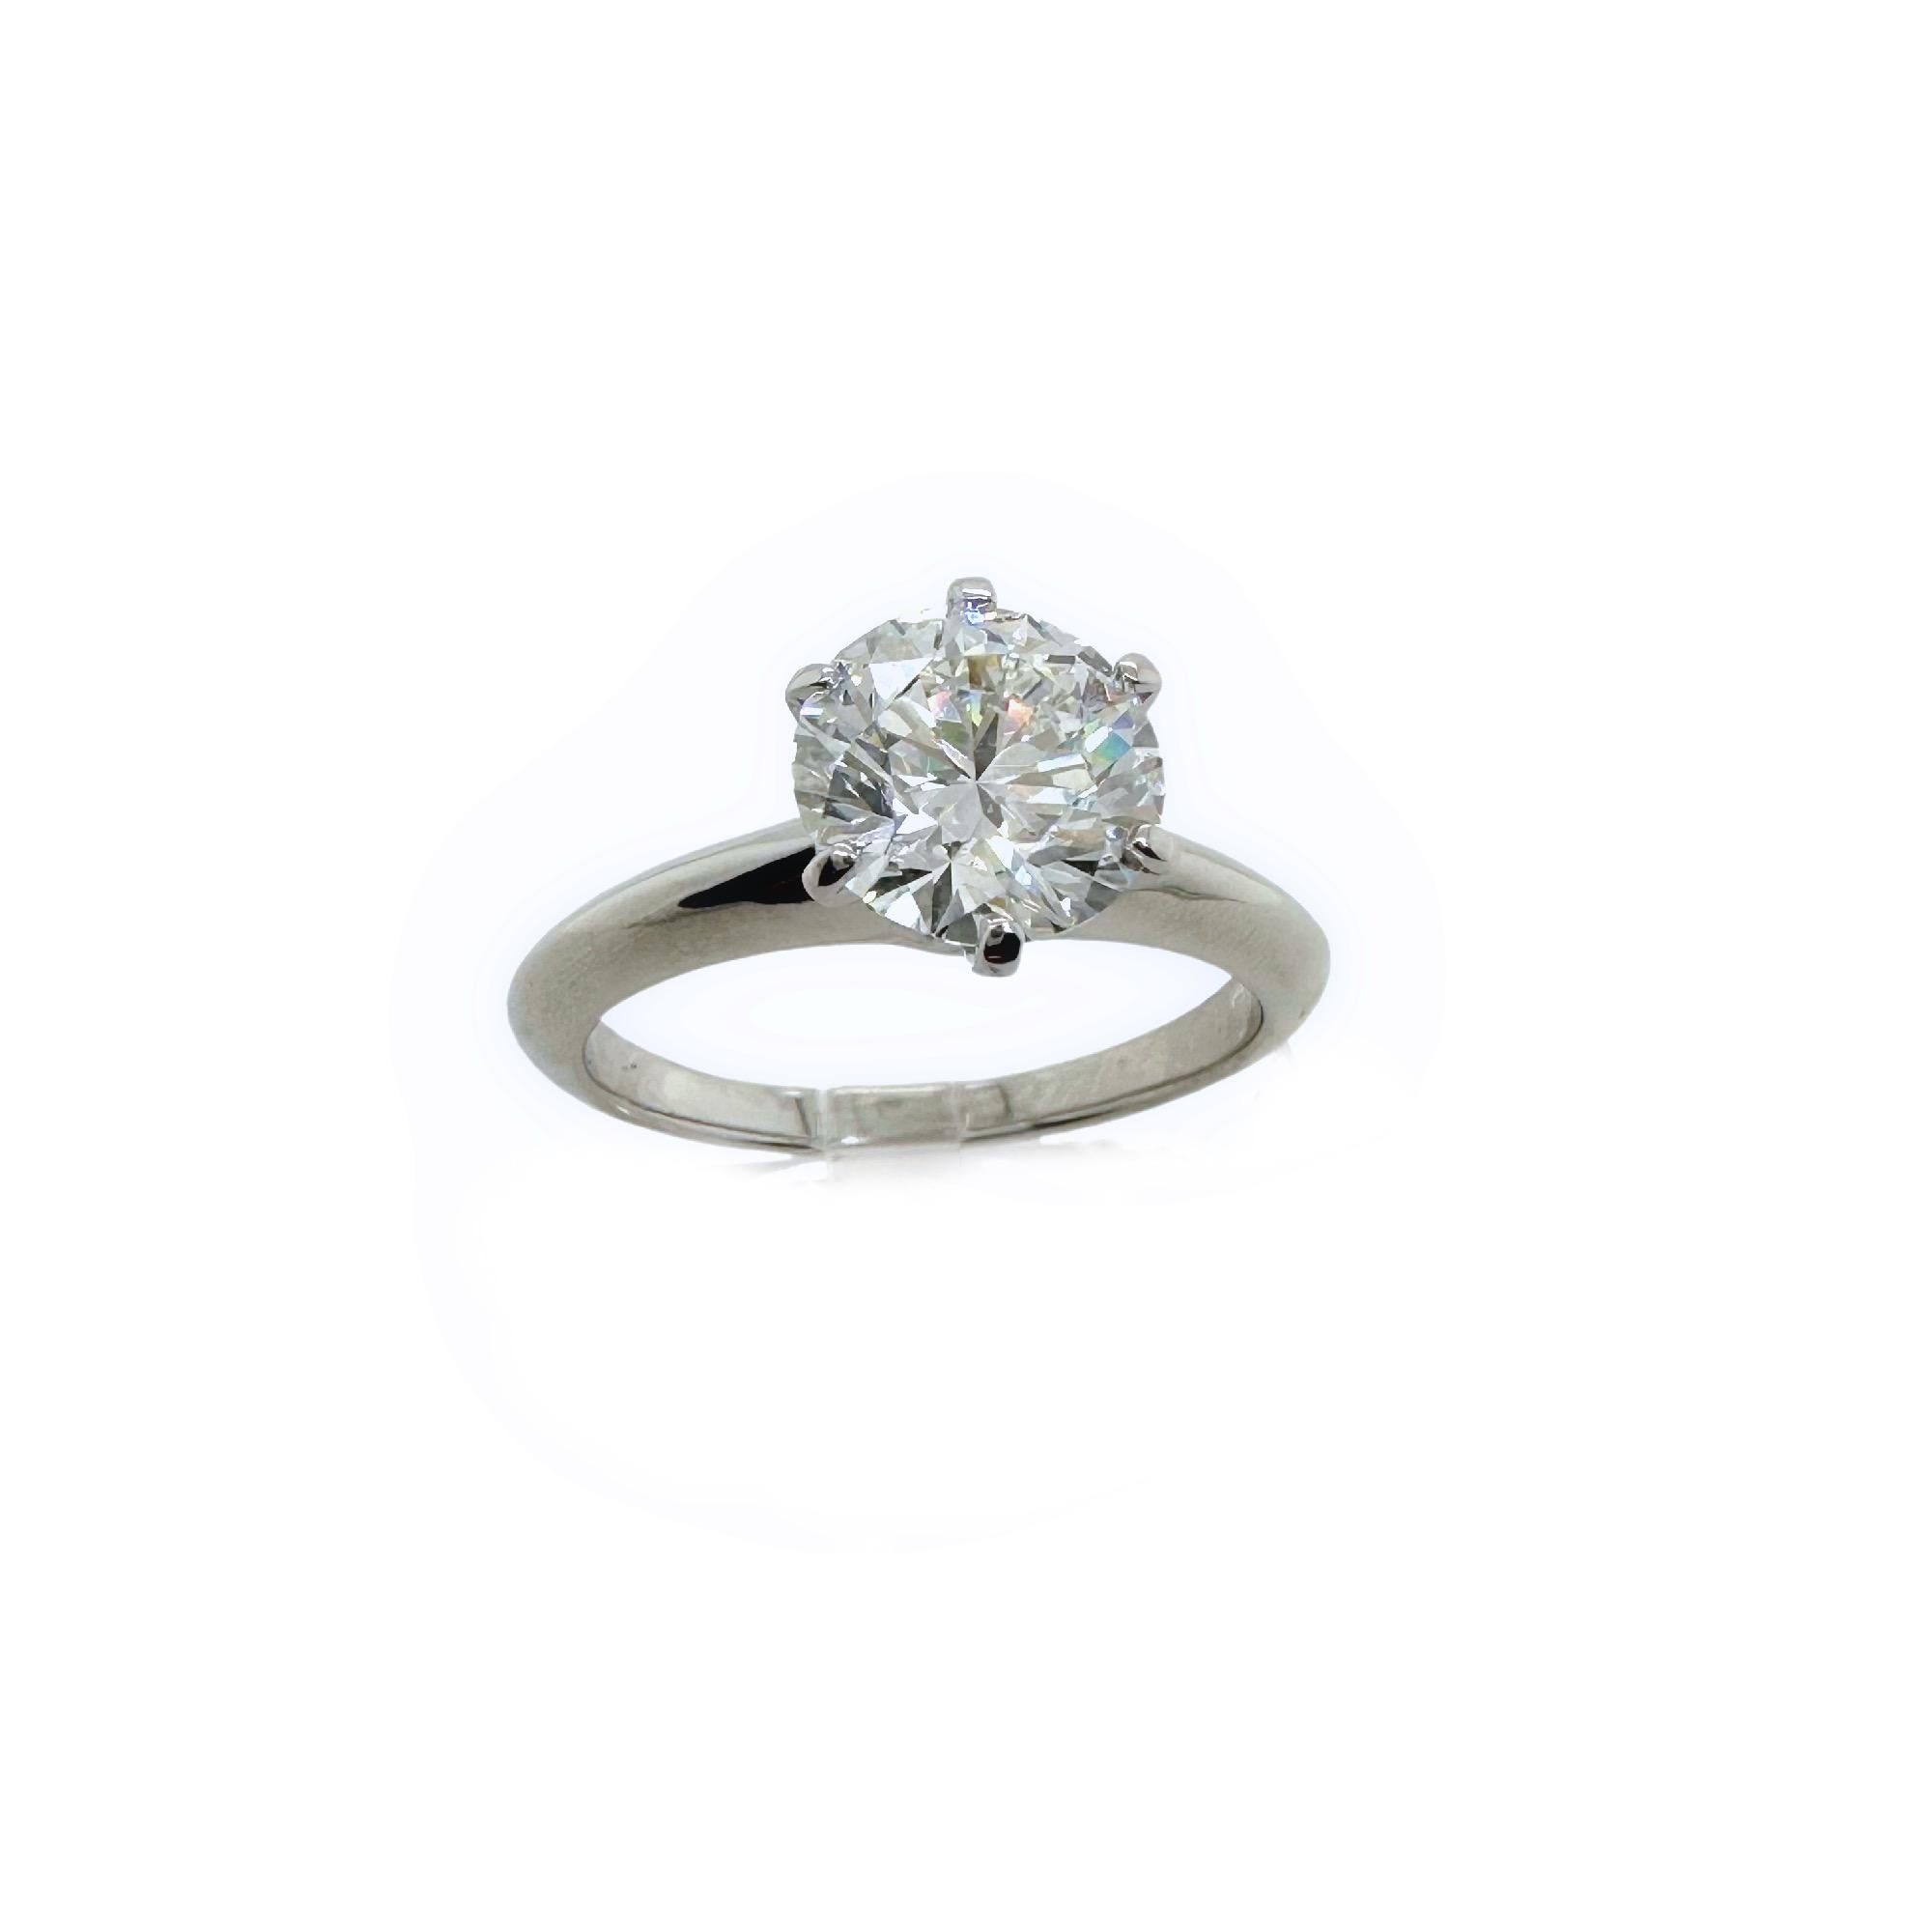 Tiffany & Co Round Diamond Solitaire 1.72 cts H VVS2 Plat Engagement Ring Papers For Sale 1